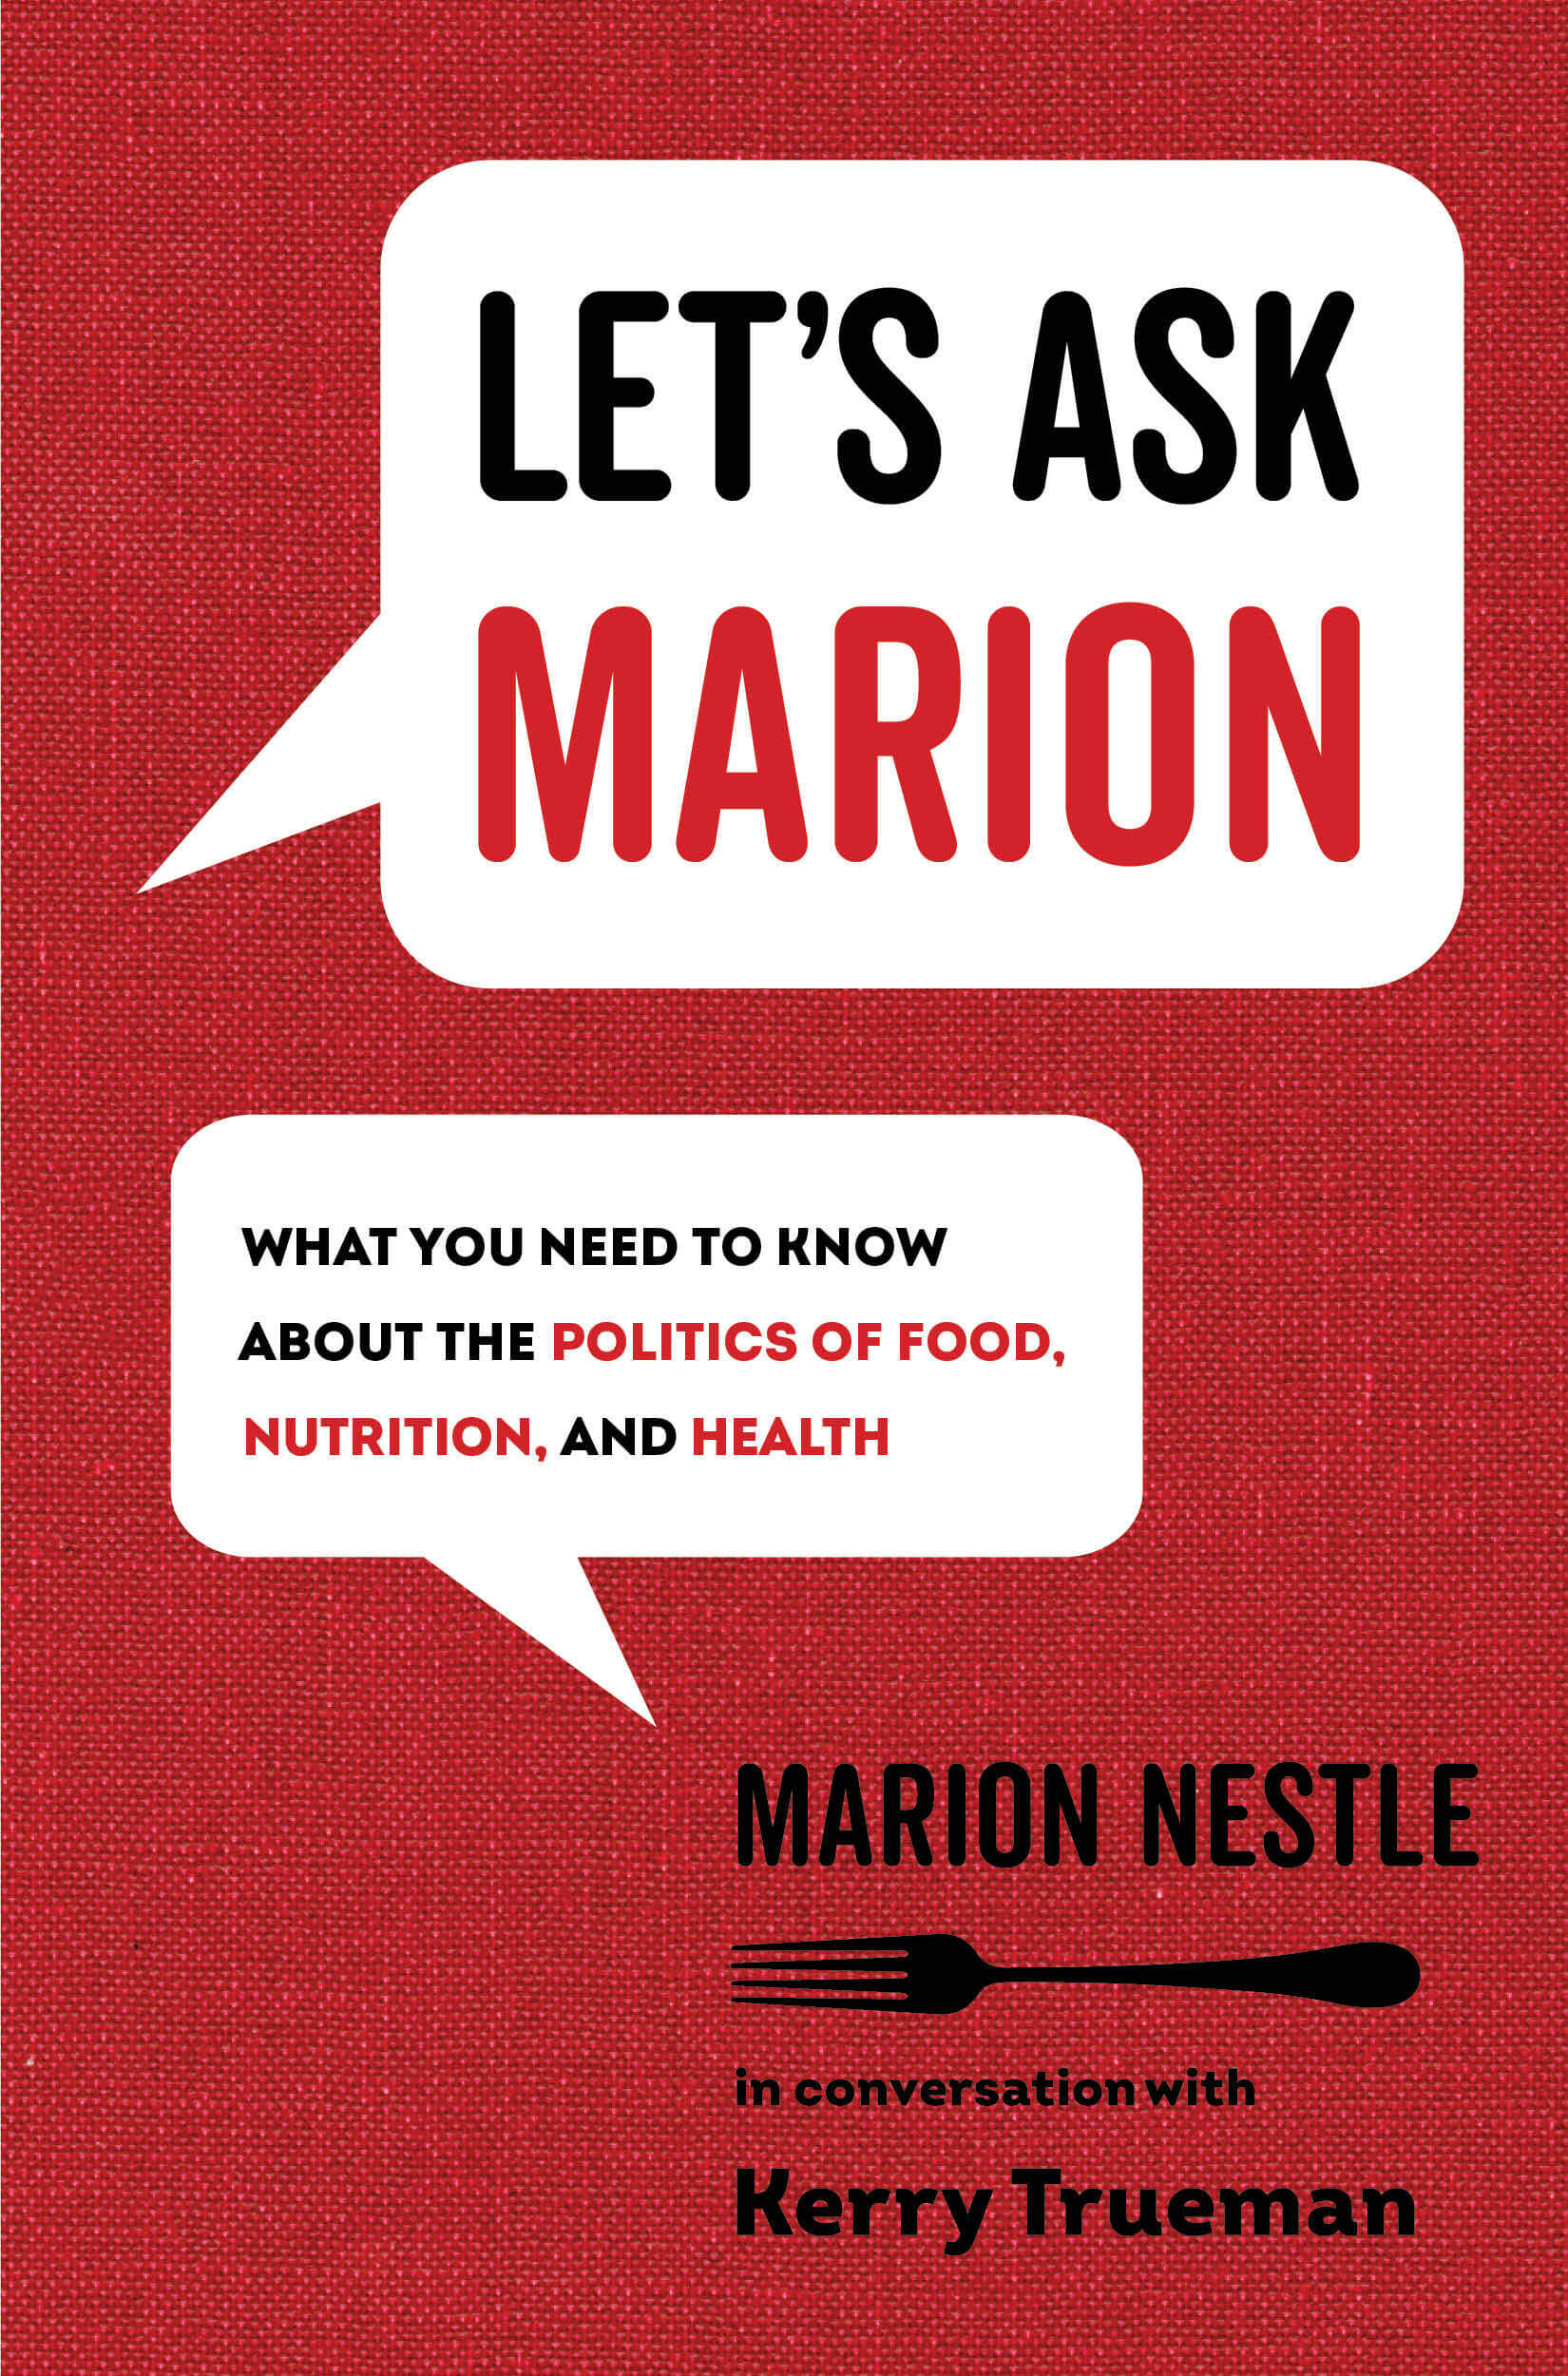 Book cover of Let's Ask Marion. September 2020